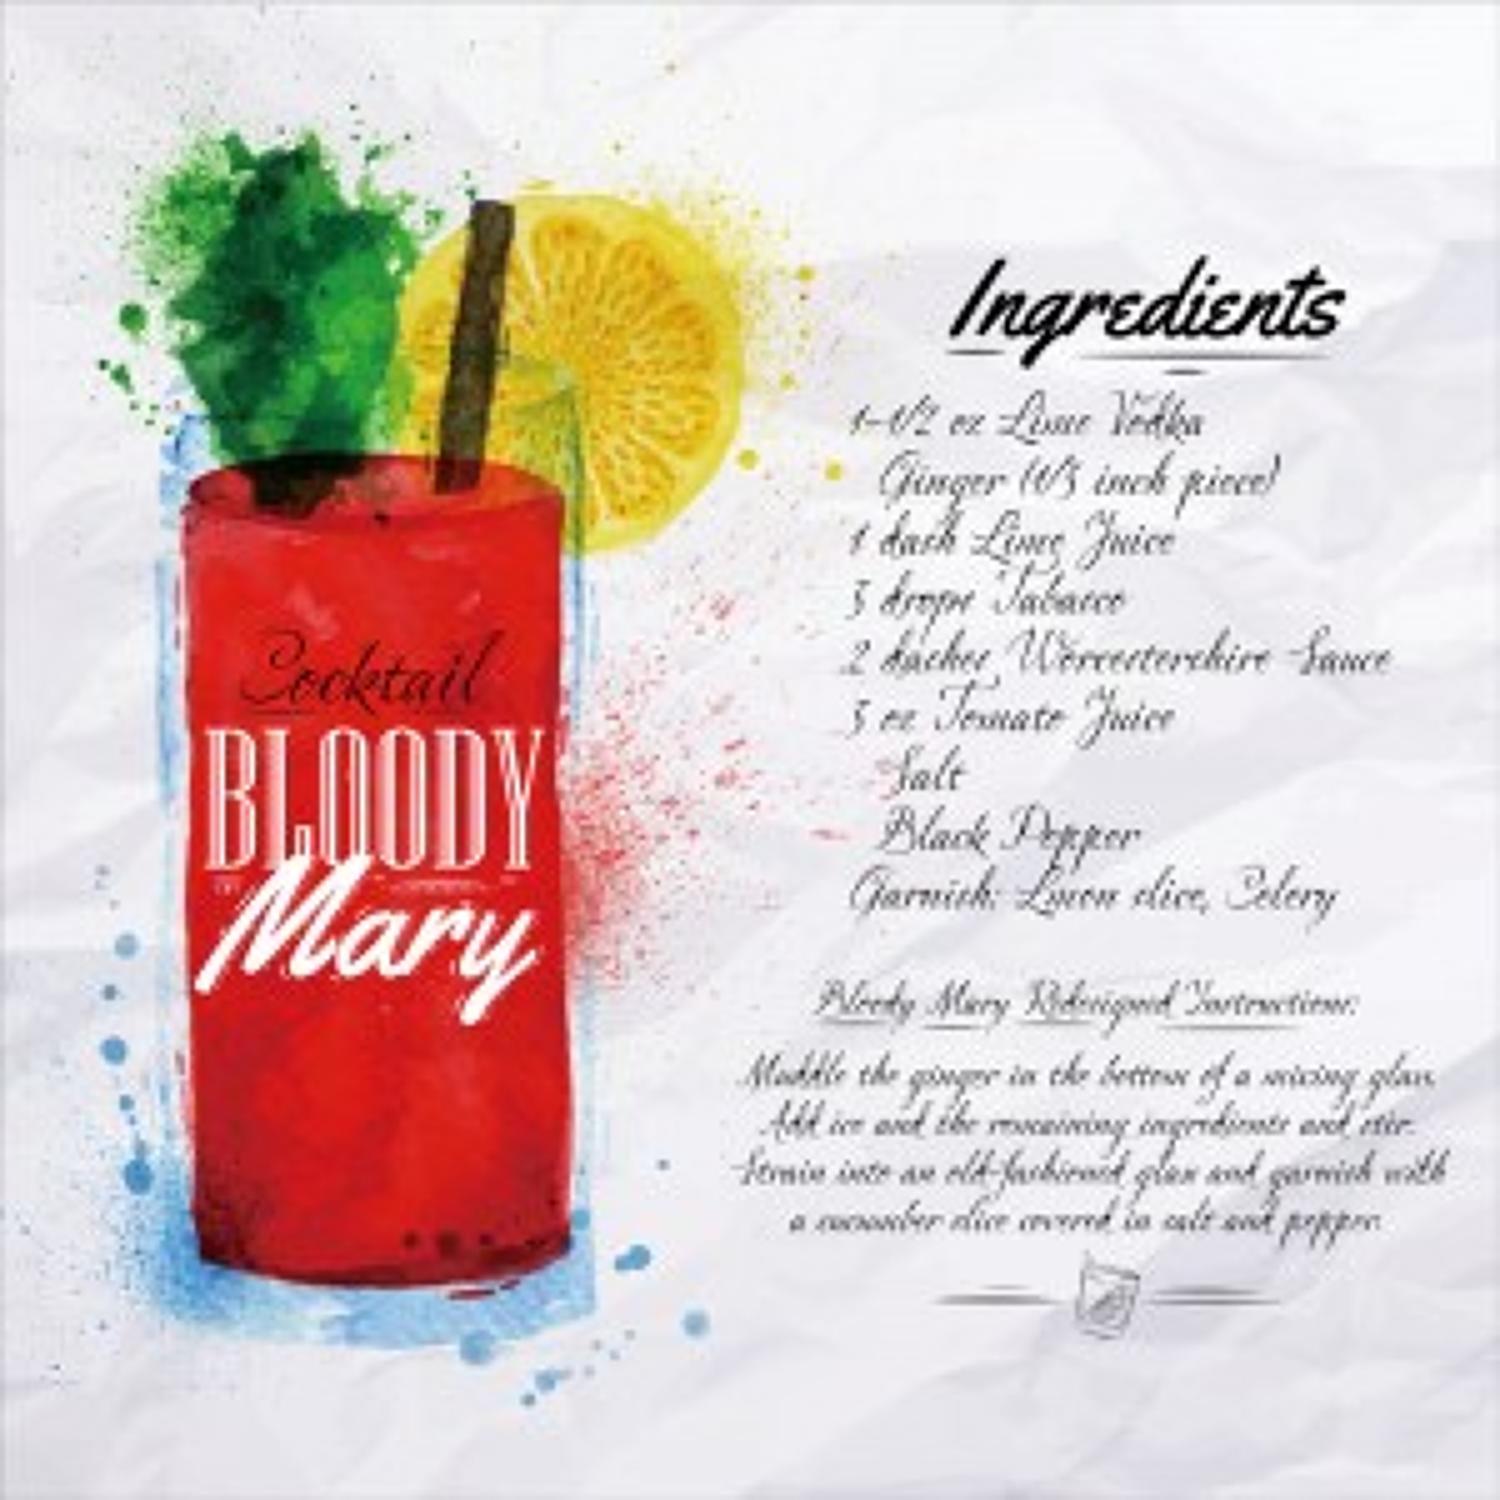 Glass wall art - Bloody mary cocktail recipe